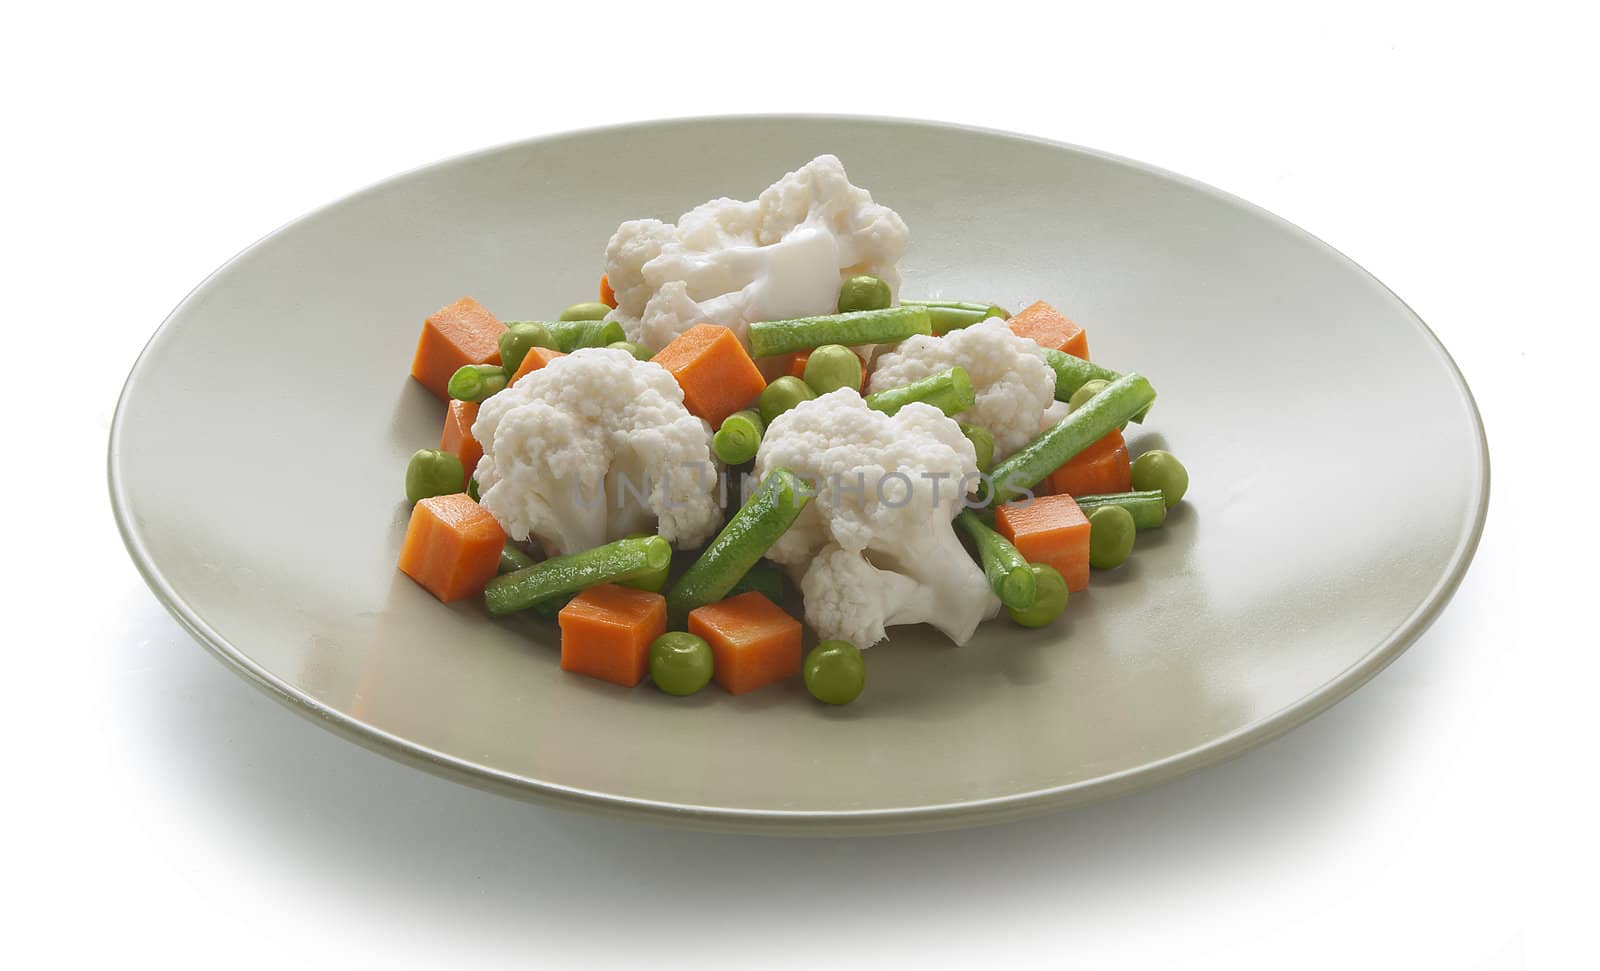 Vegetable mix with cauliflower, carrot, peas and kidney bean on the green plate